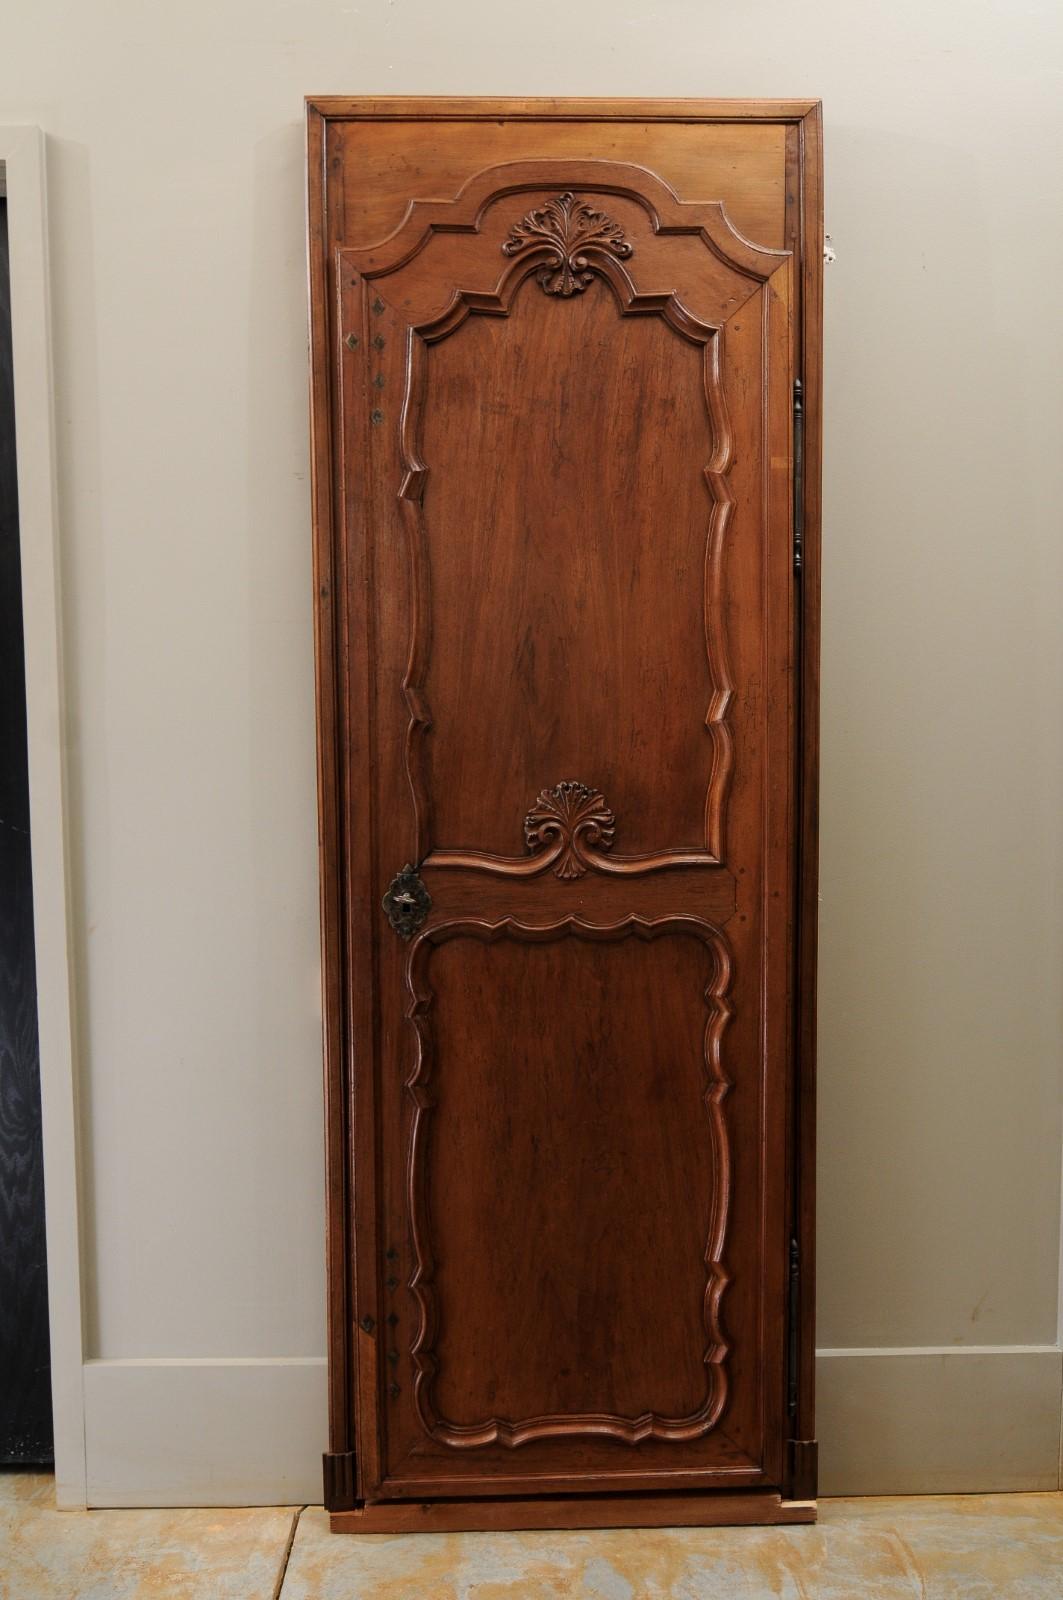 A French Louis XVI period wooden communication door from the late 18th century, with carved foliage motifs. Created in France during the last decade of the 18th century, this French door features two molded panels topped with a skillfully carved